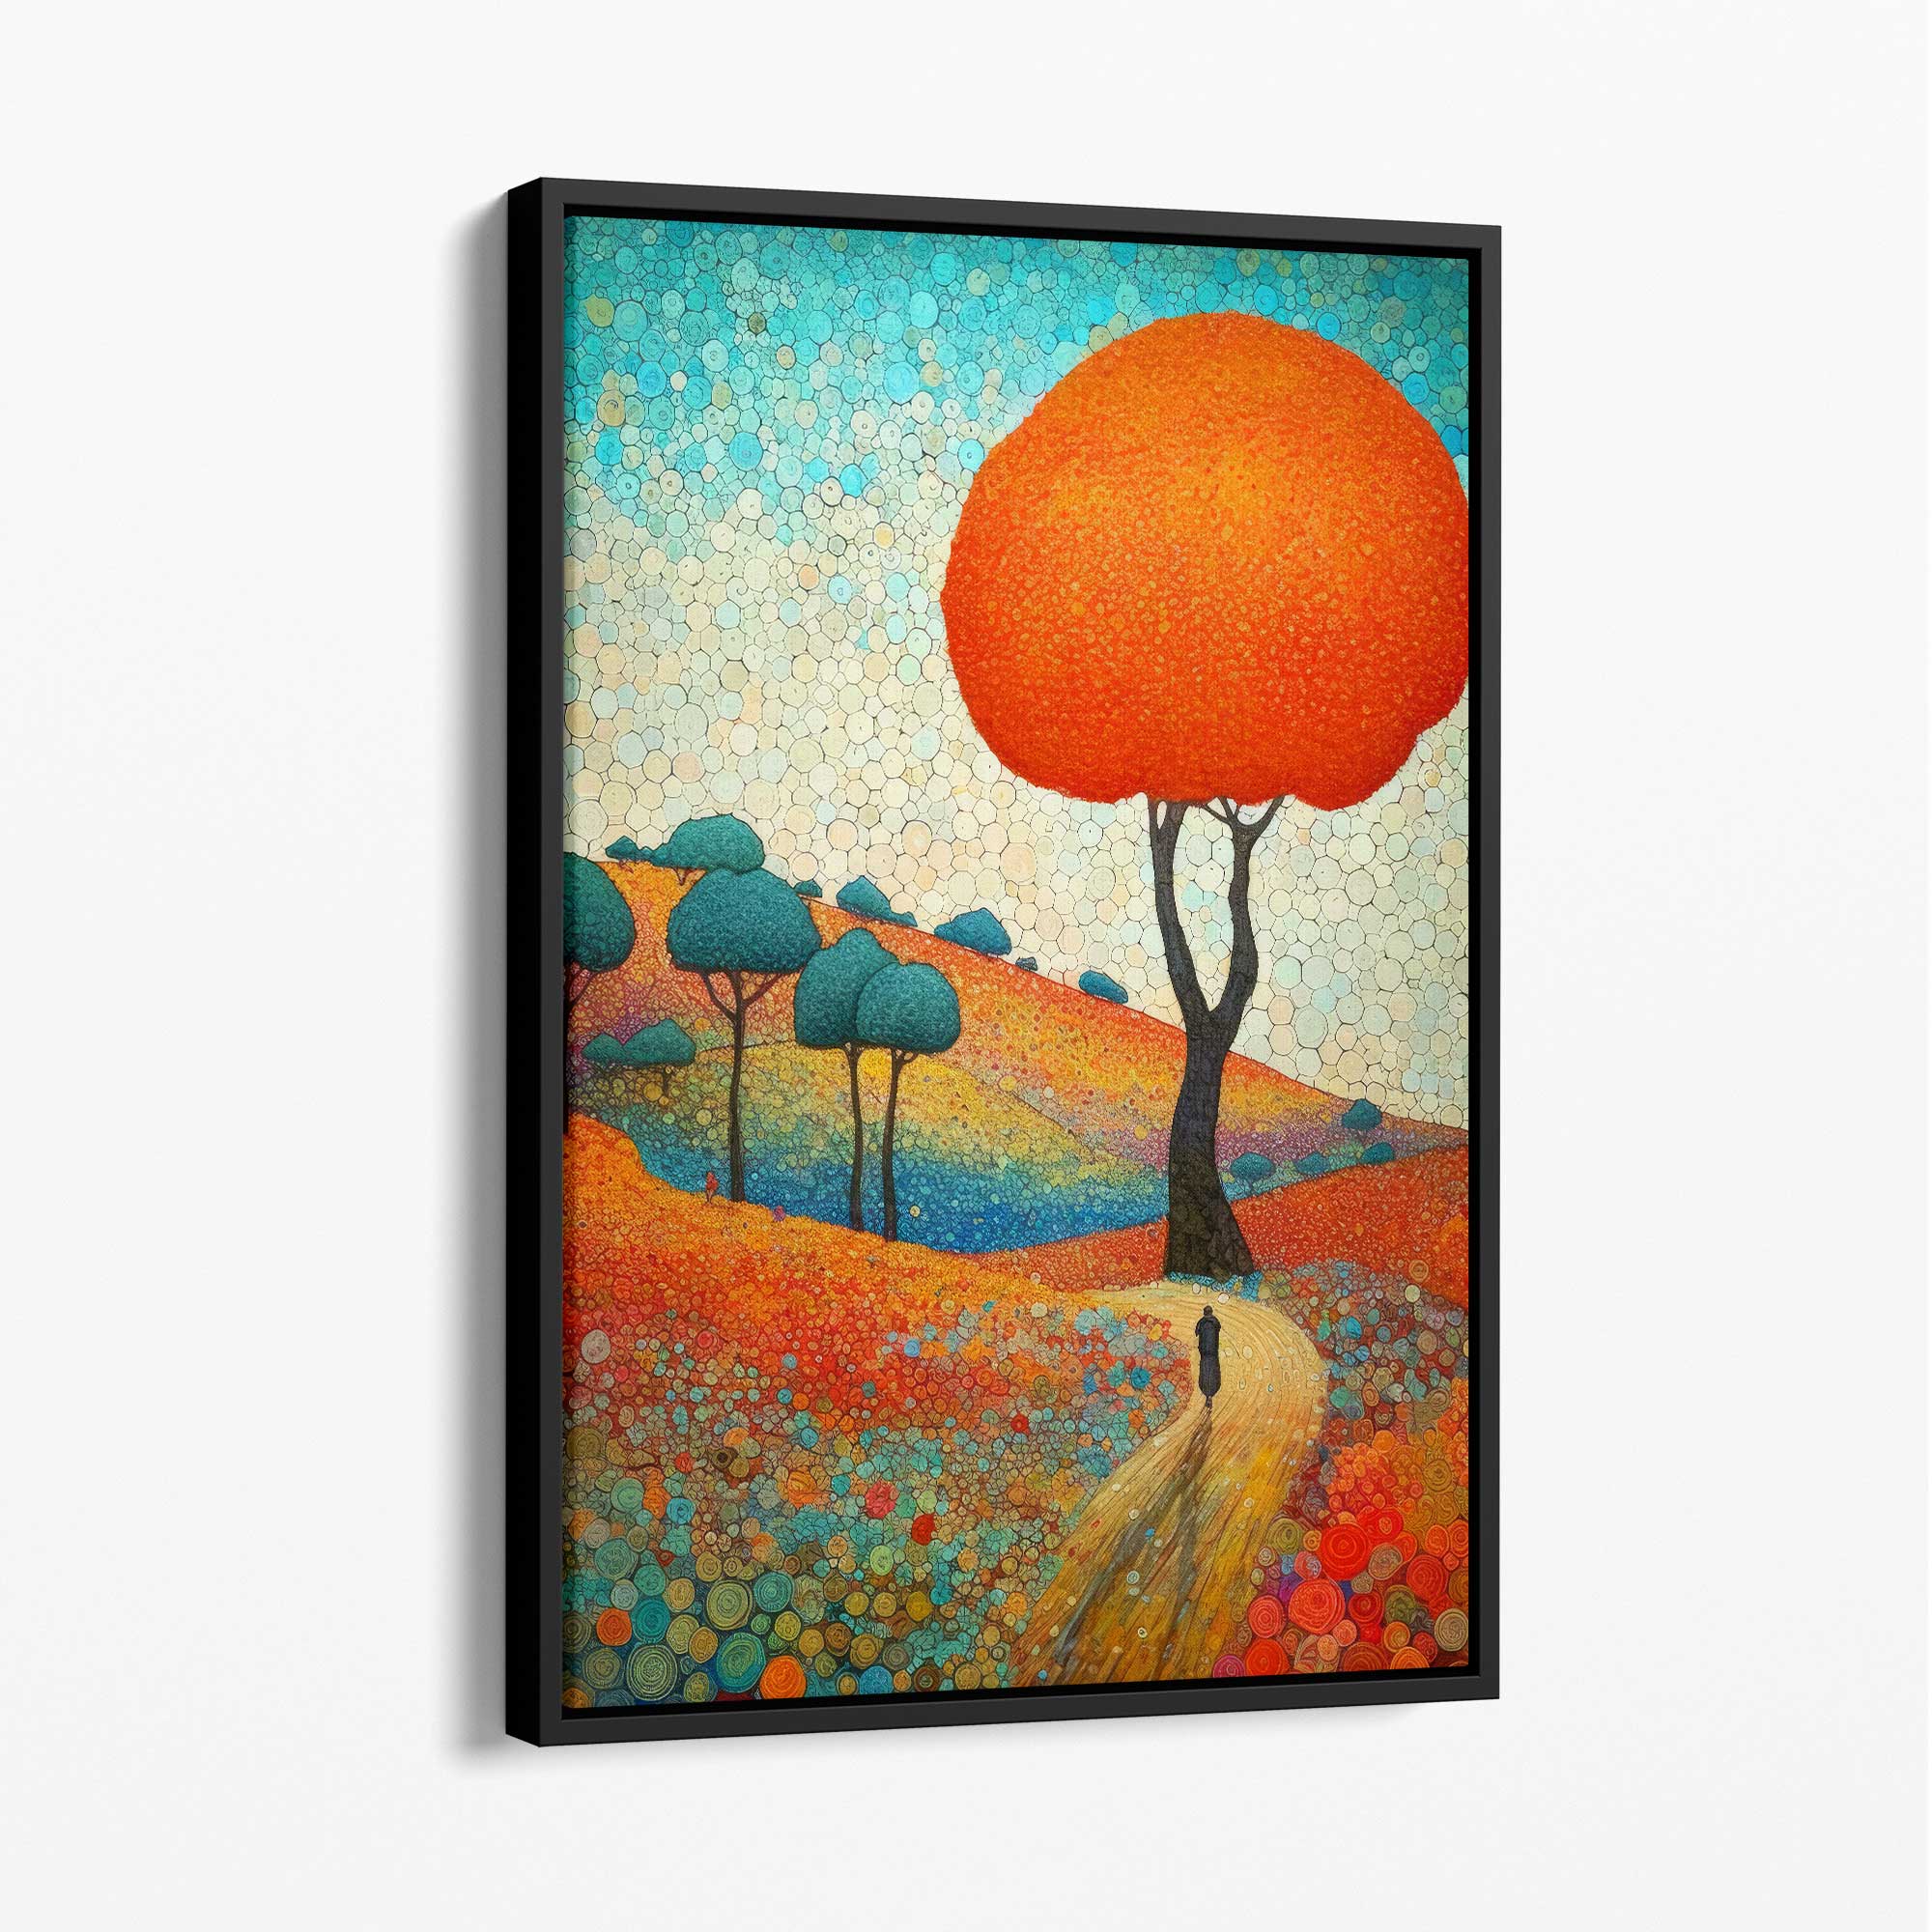 Colourful Hills and Tree Abstract Painting Canvas Print with Black Float Frame | Artze Wall Art UK